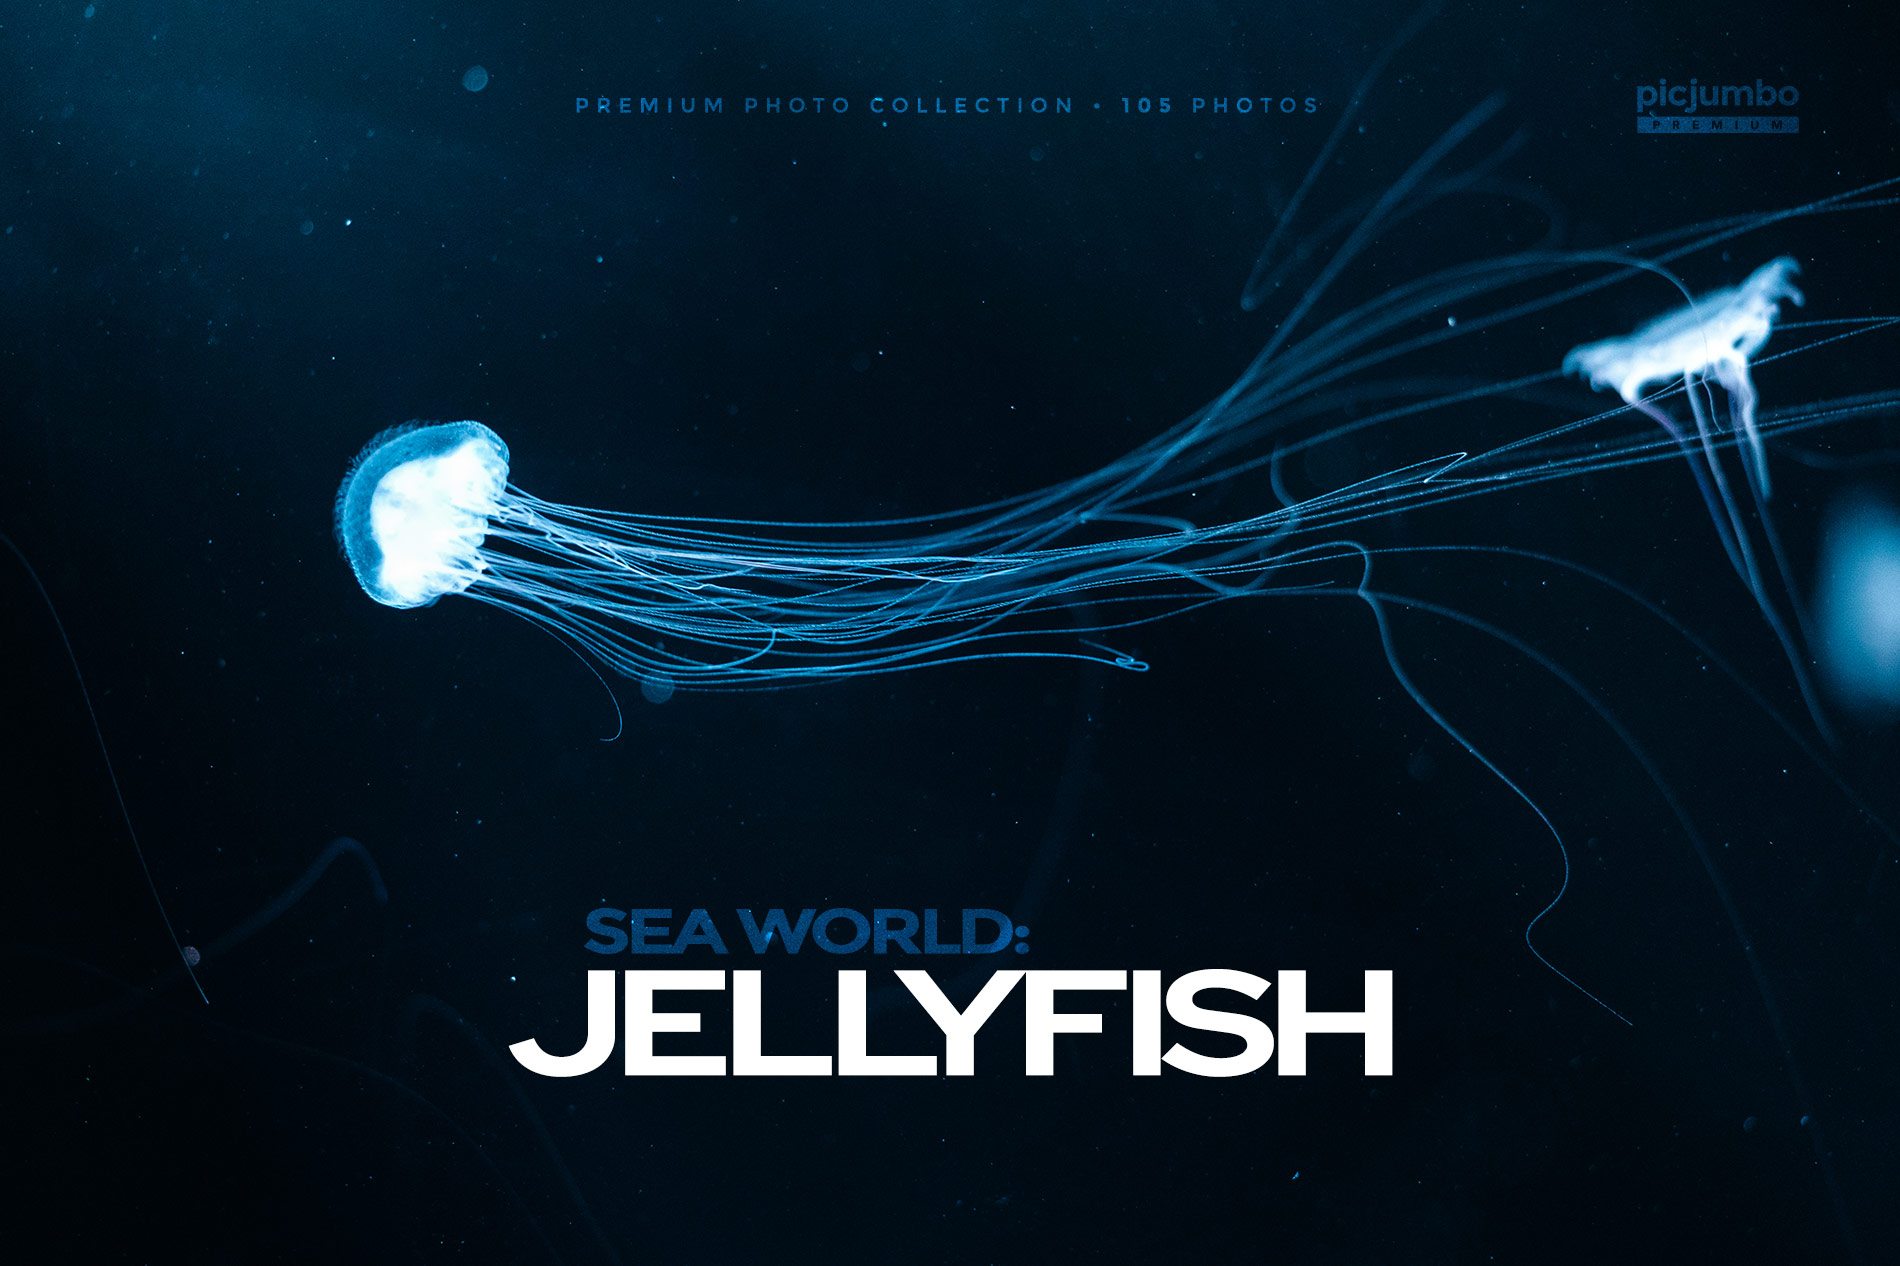 Download hi-res stock photos from our Sea World: Jellyfish PREMIUM Collection!